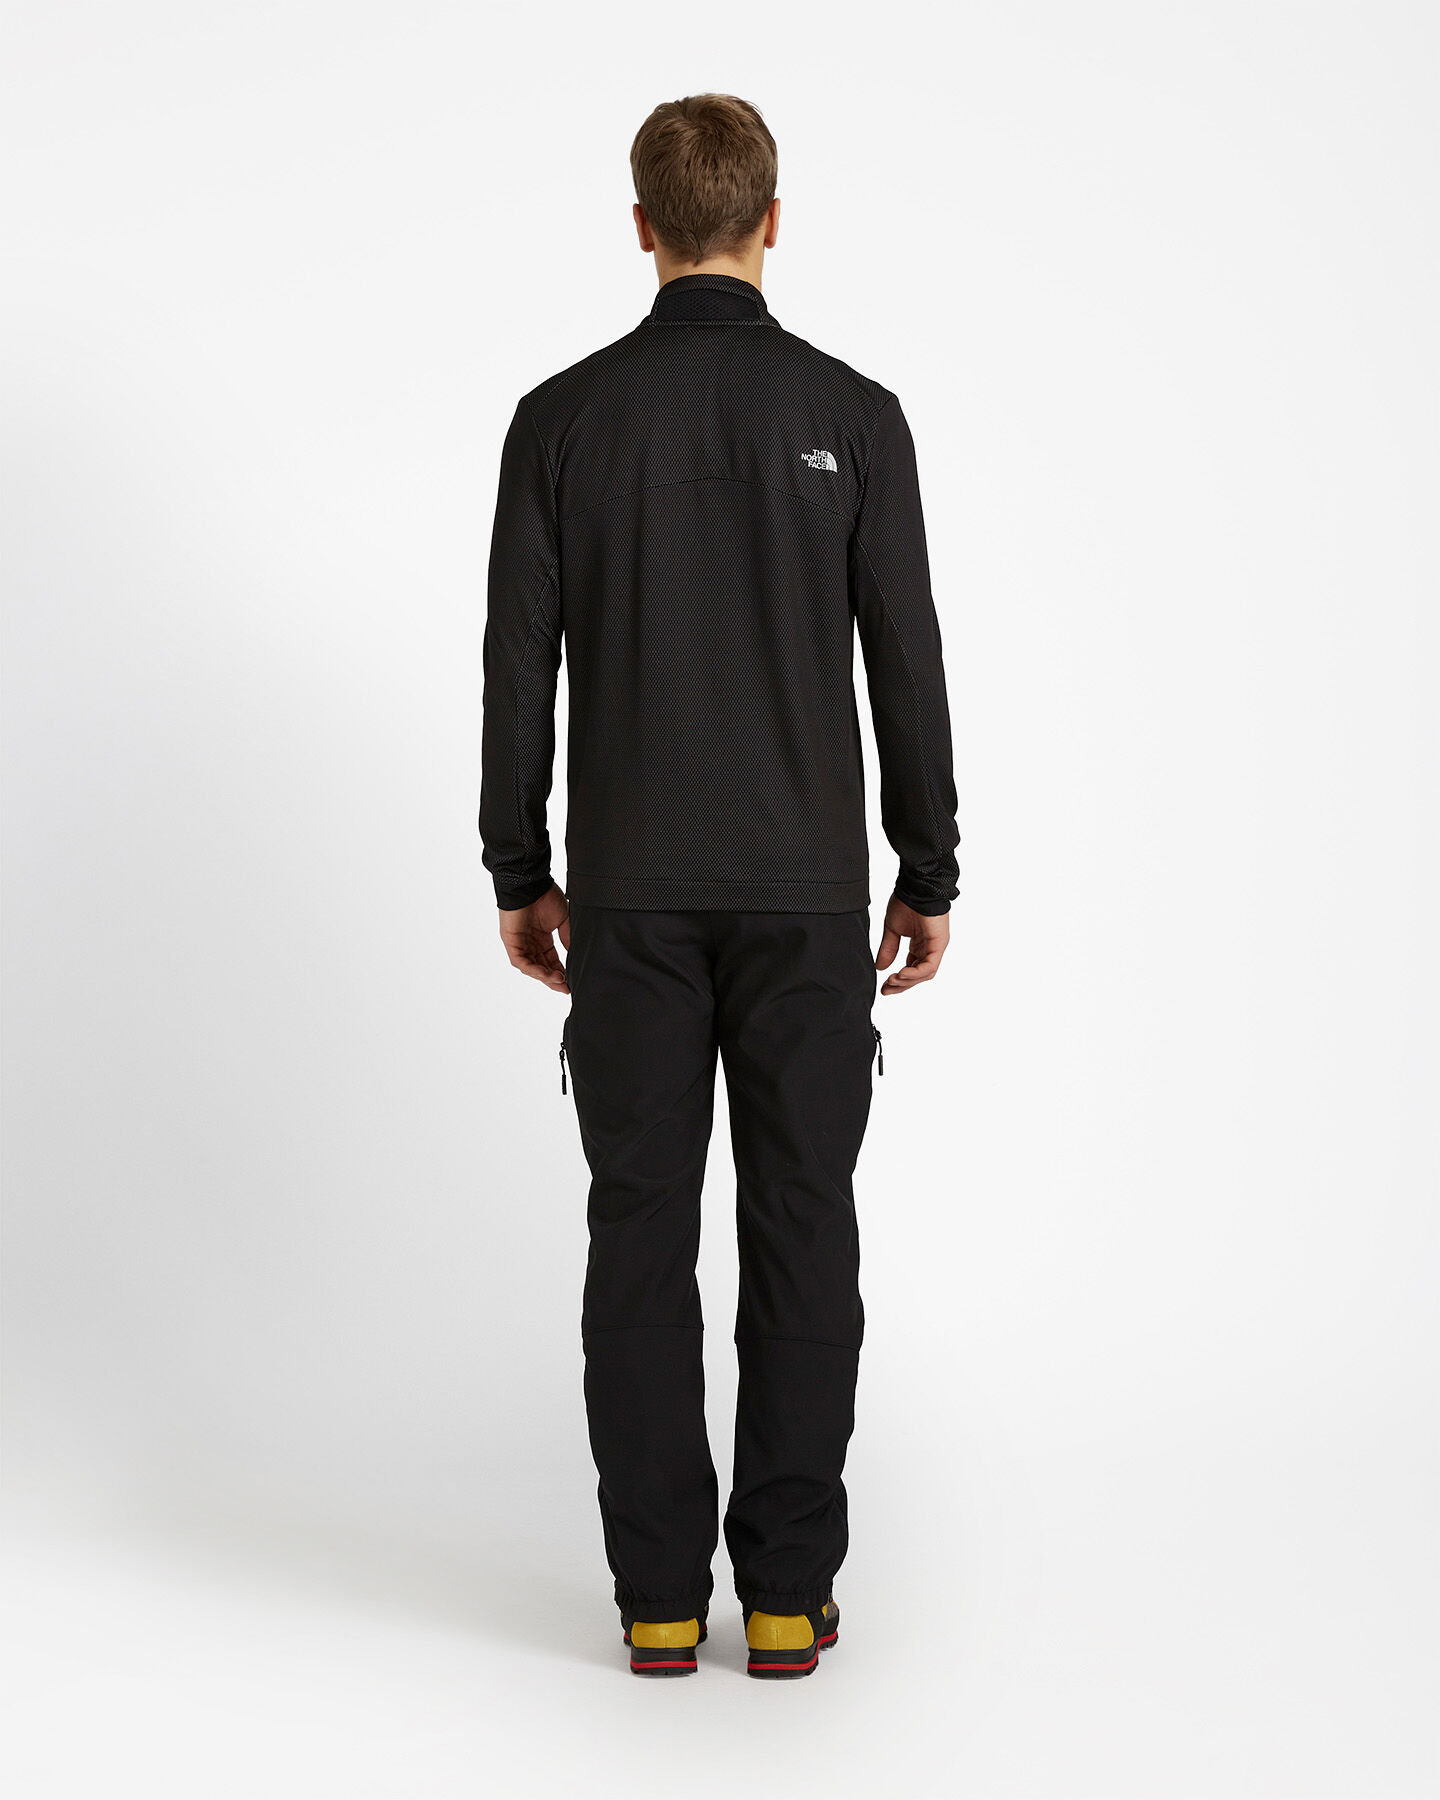  Pile THE NORTH FACE APEX MIDLAYER M S5018570|JK3|S scatto 2